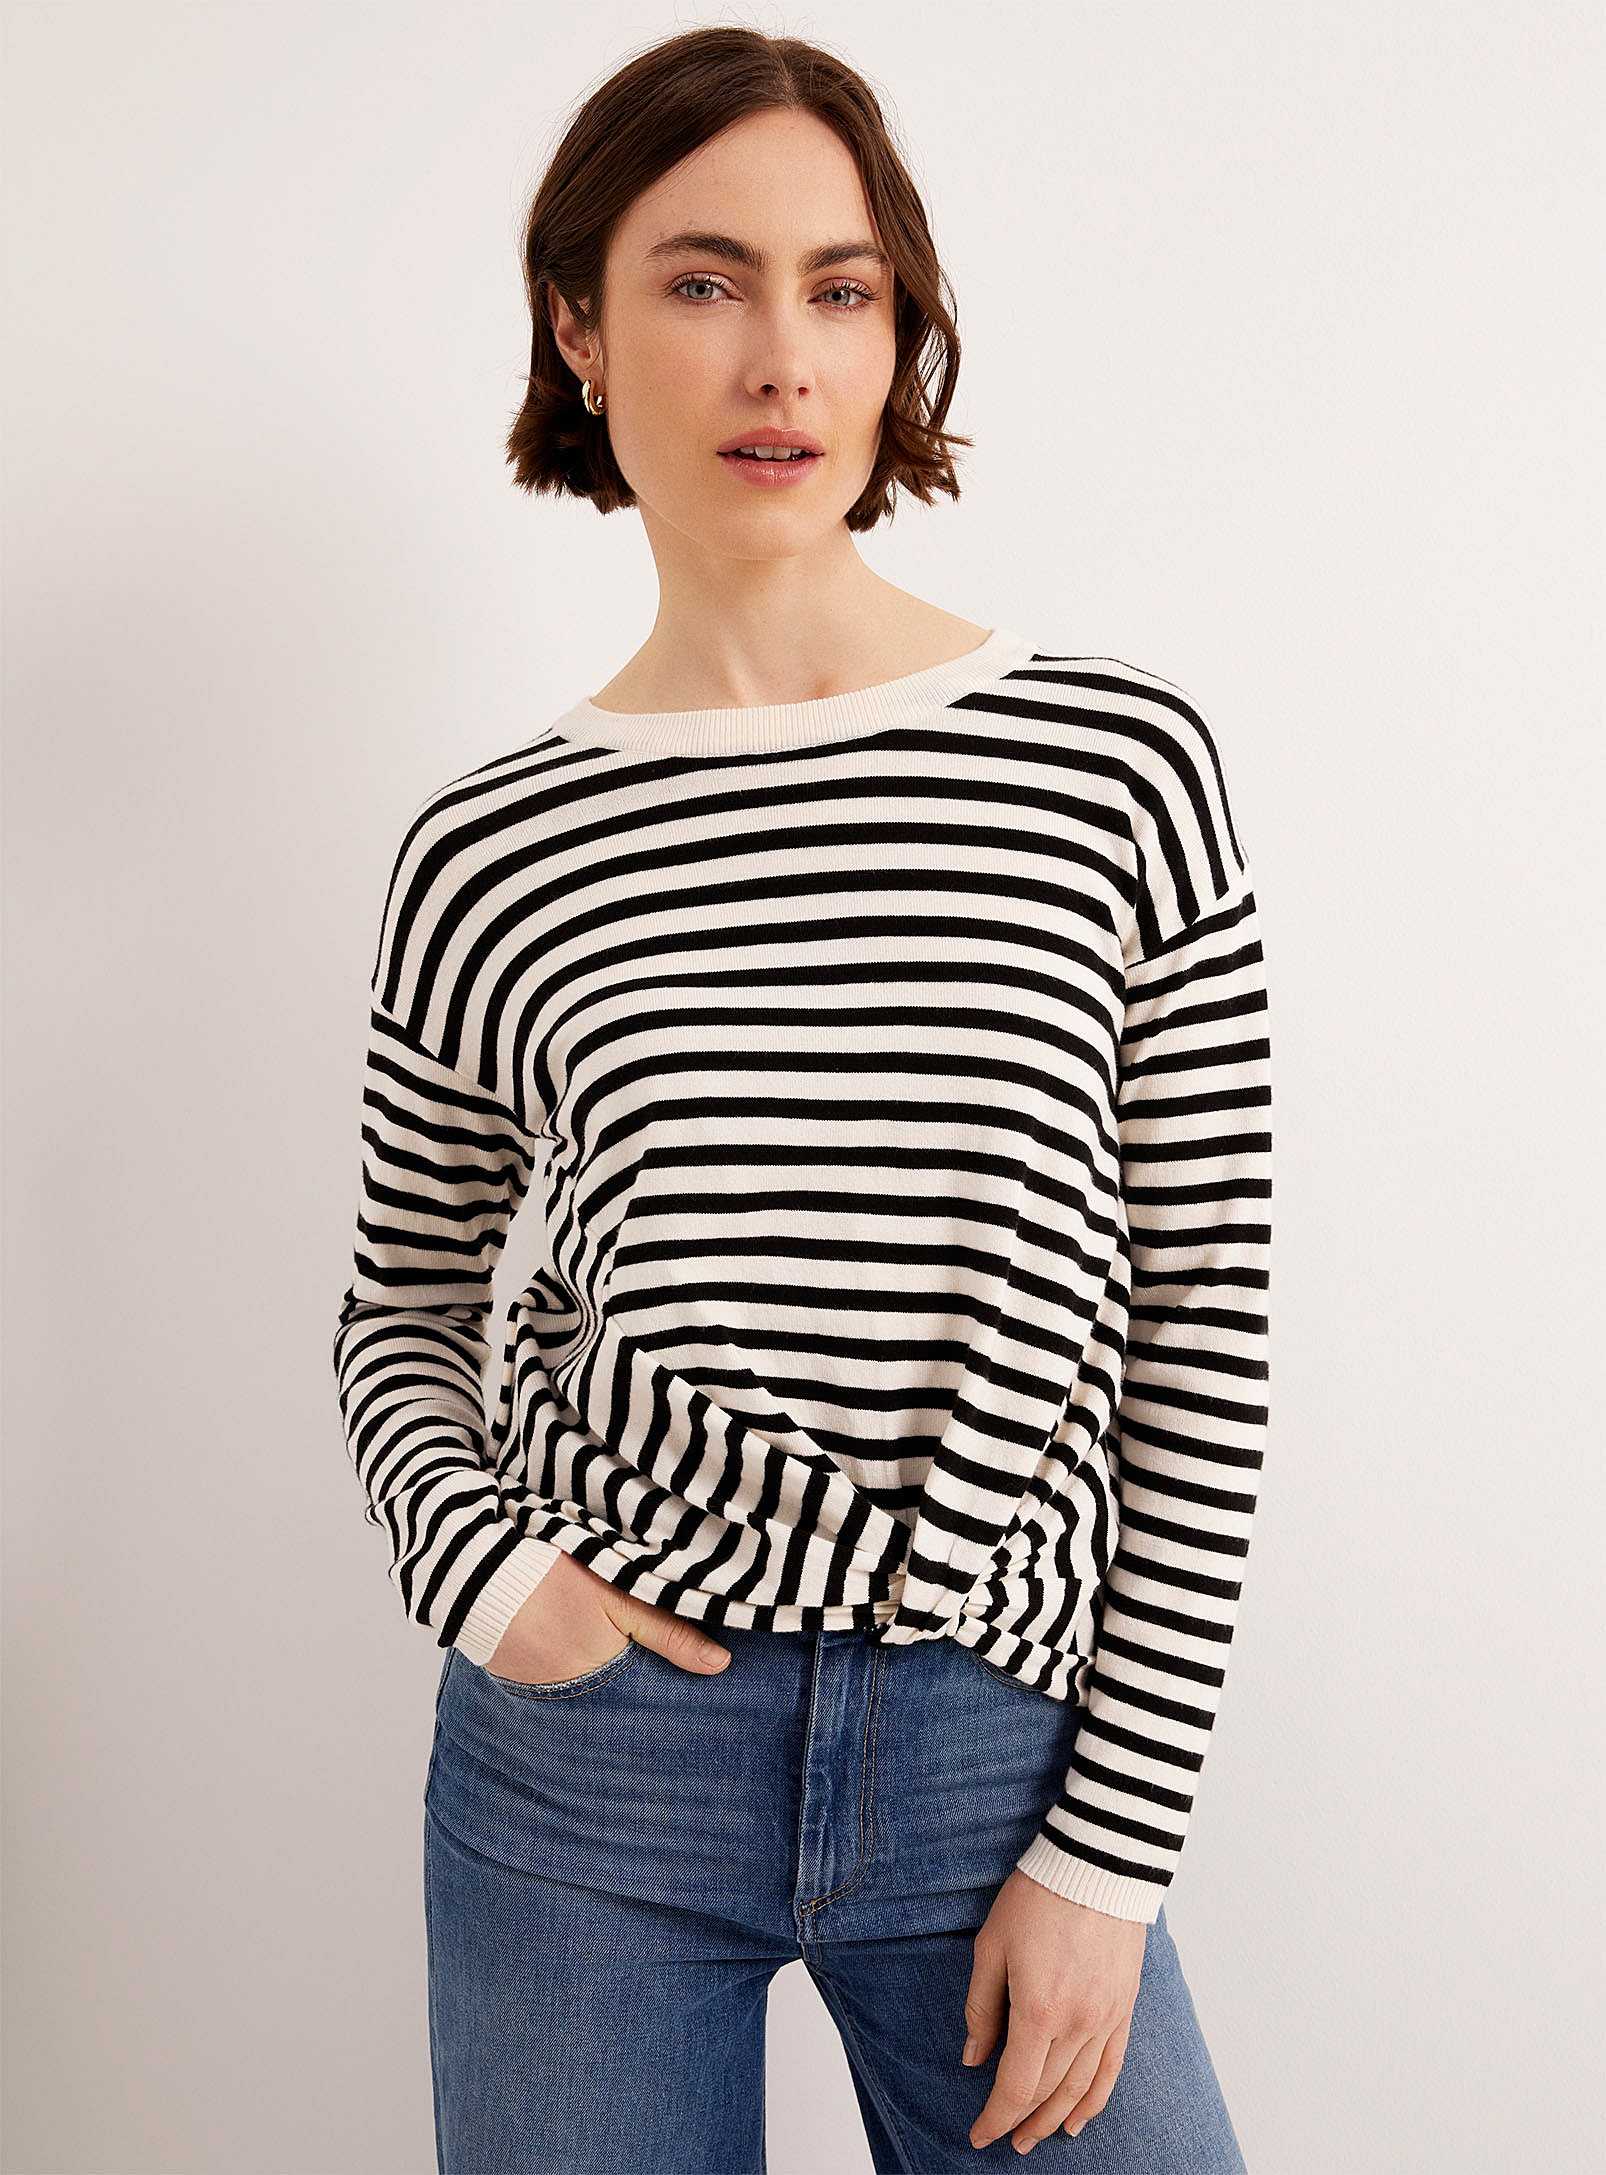 Contemporaine Striped Twisted T-shirt In Patterned Black